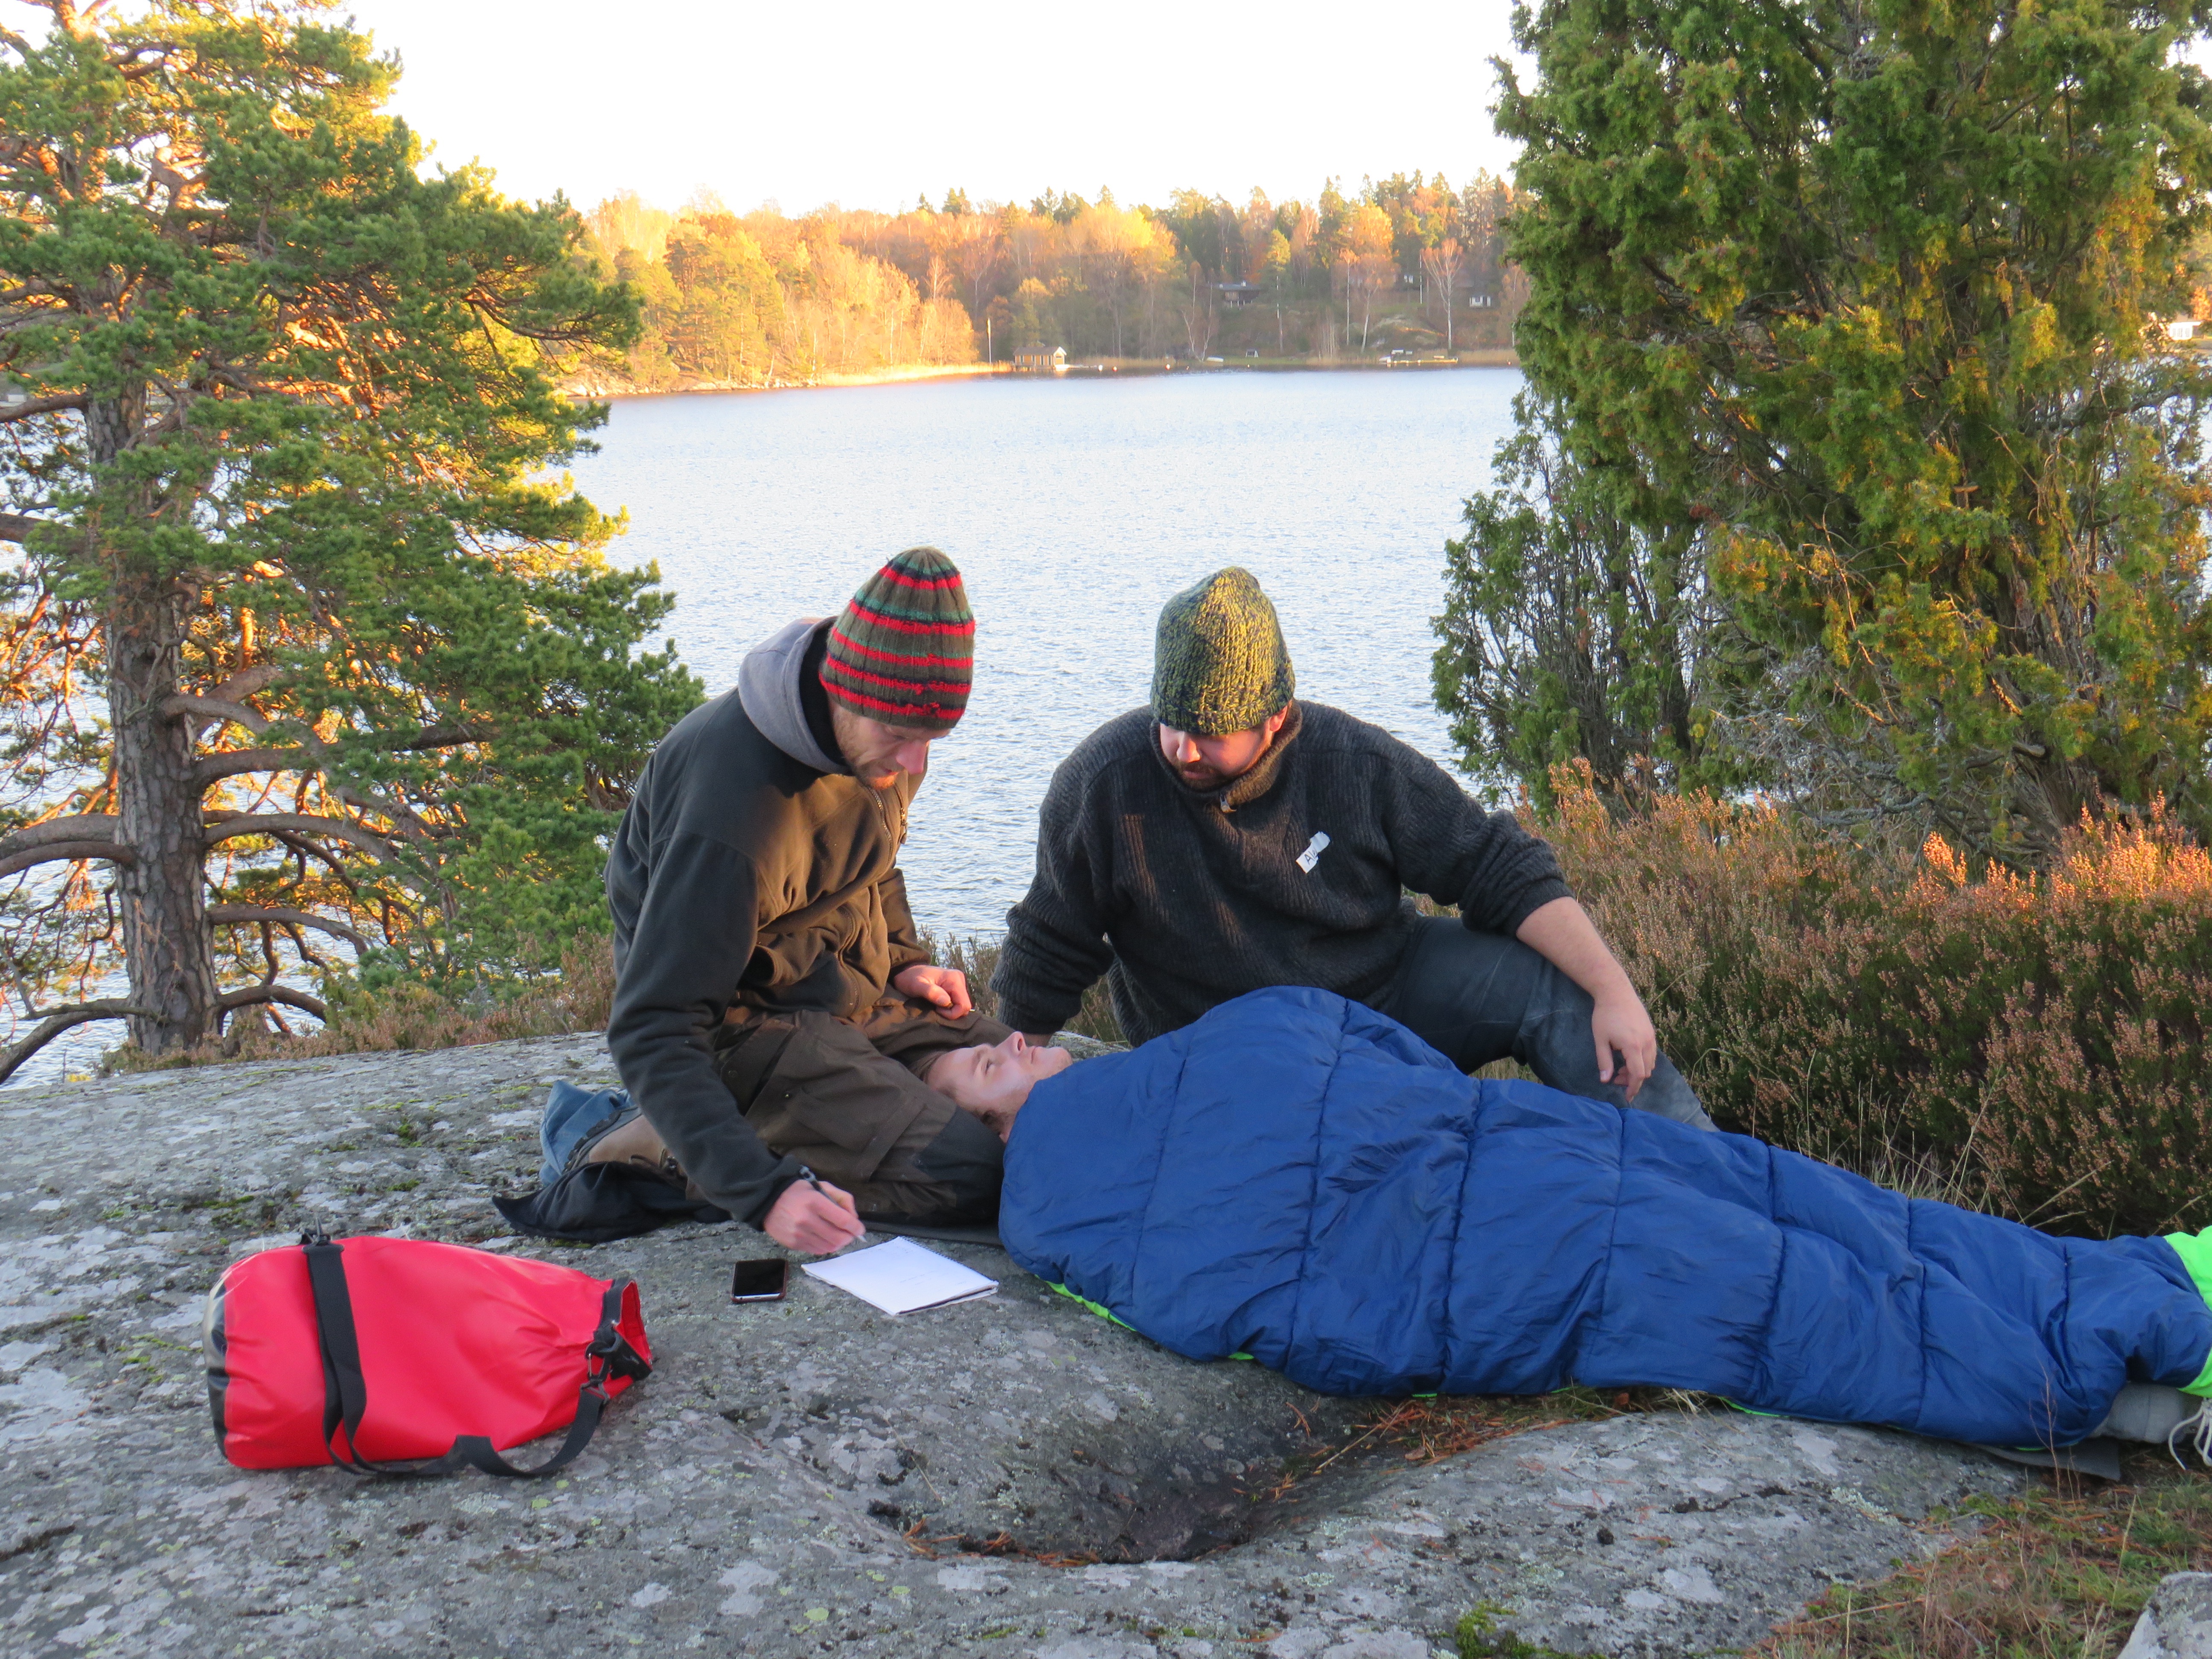 two NOLS Wilderness Medicine students practice caring for a patient lying in a sleeping back on a rock overlooking a lake